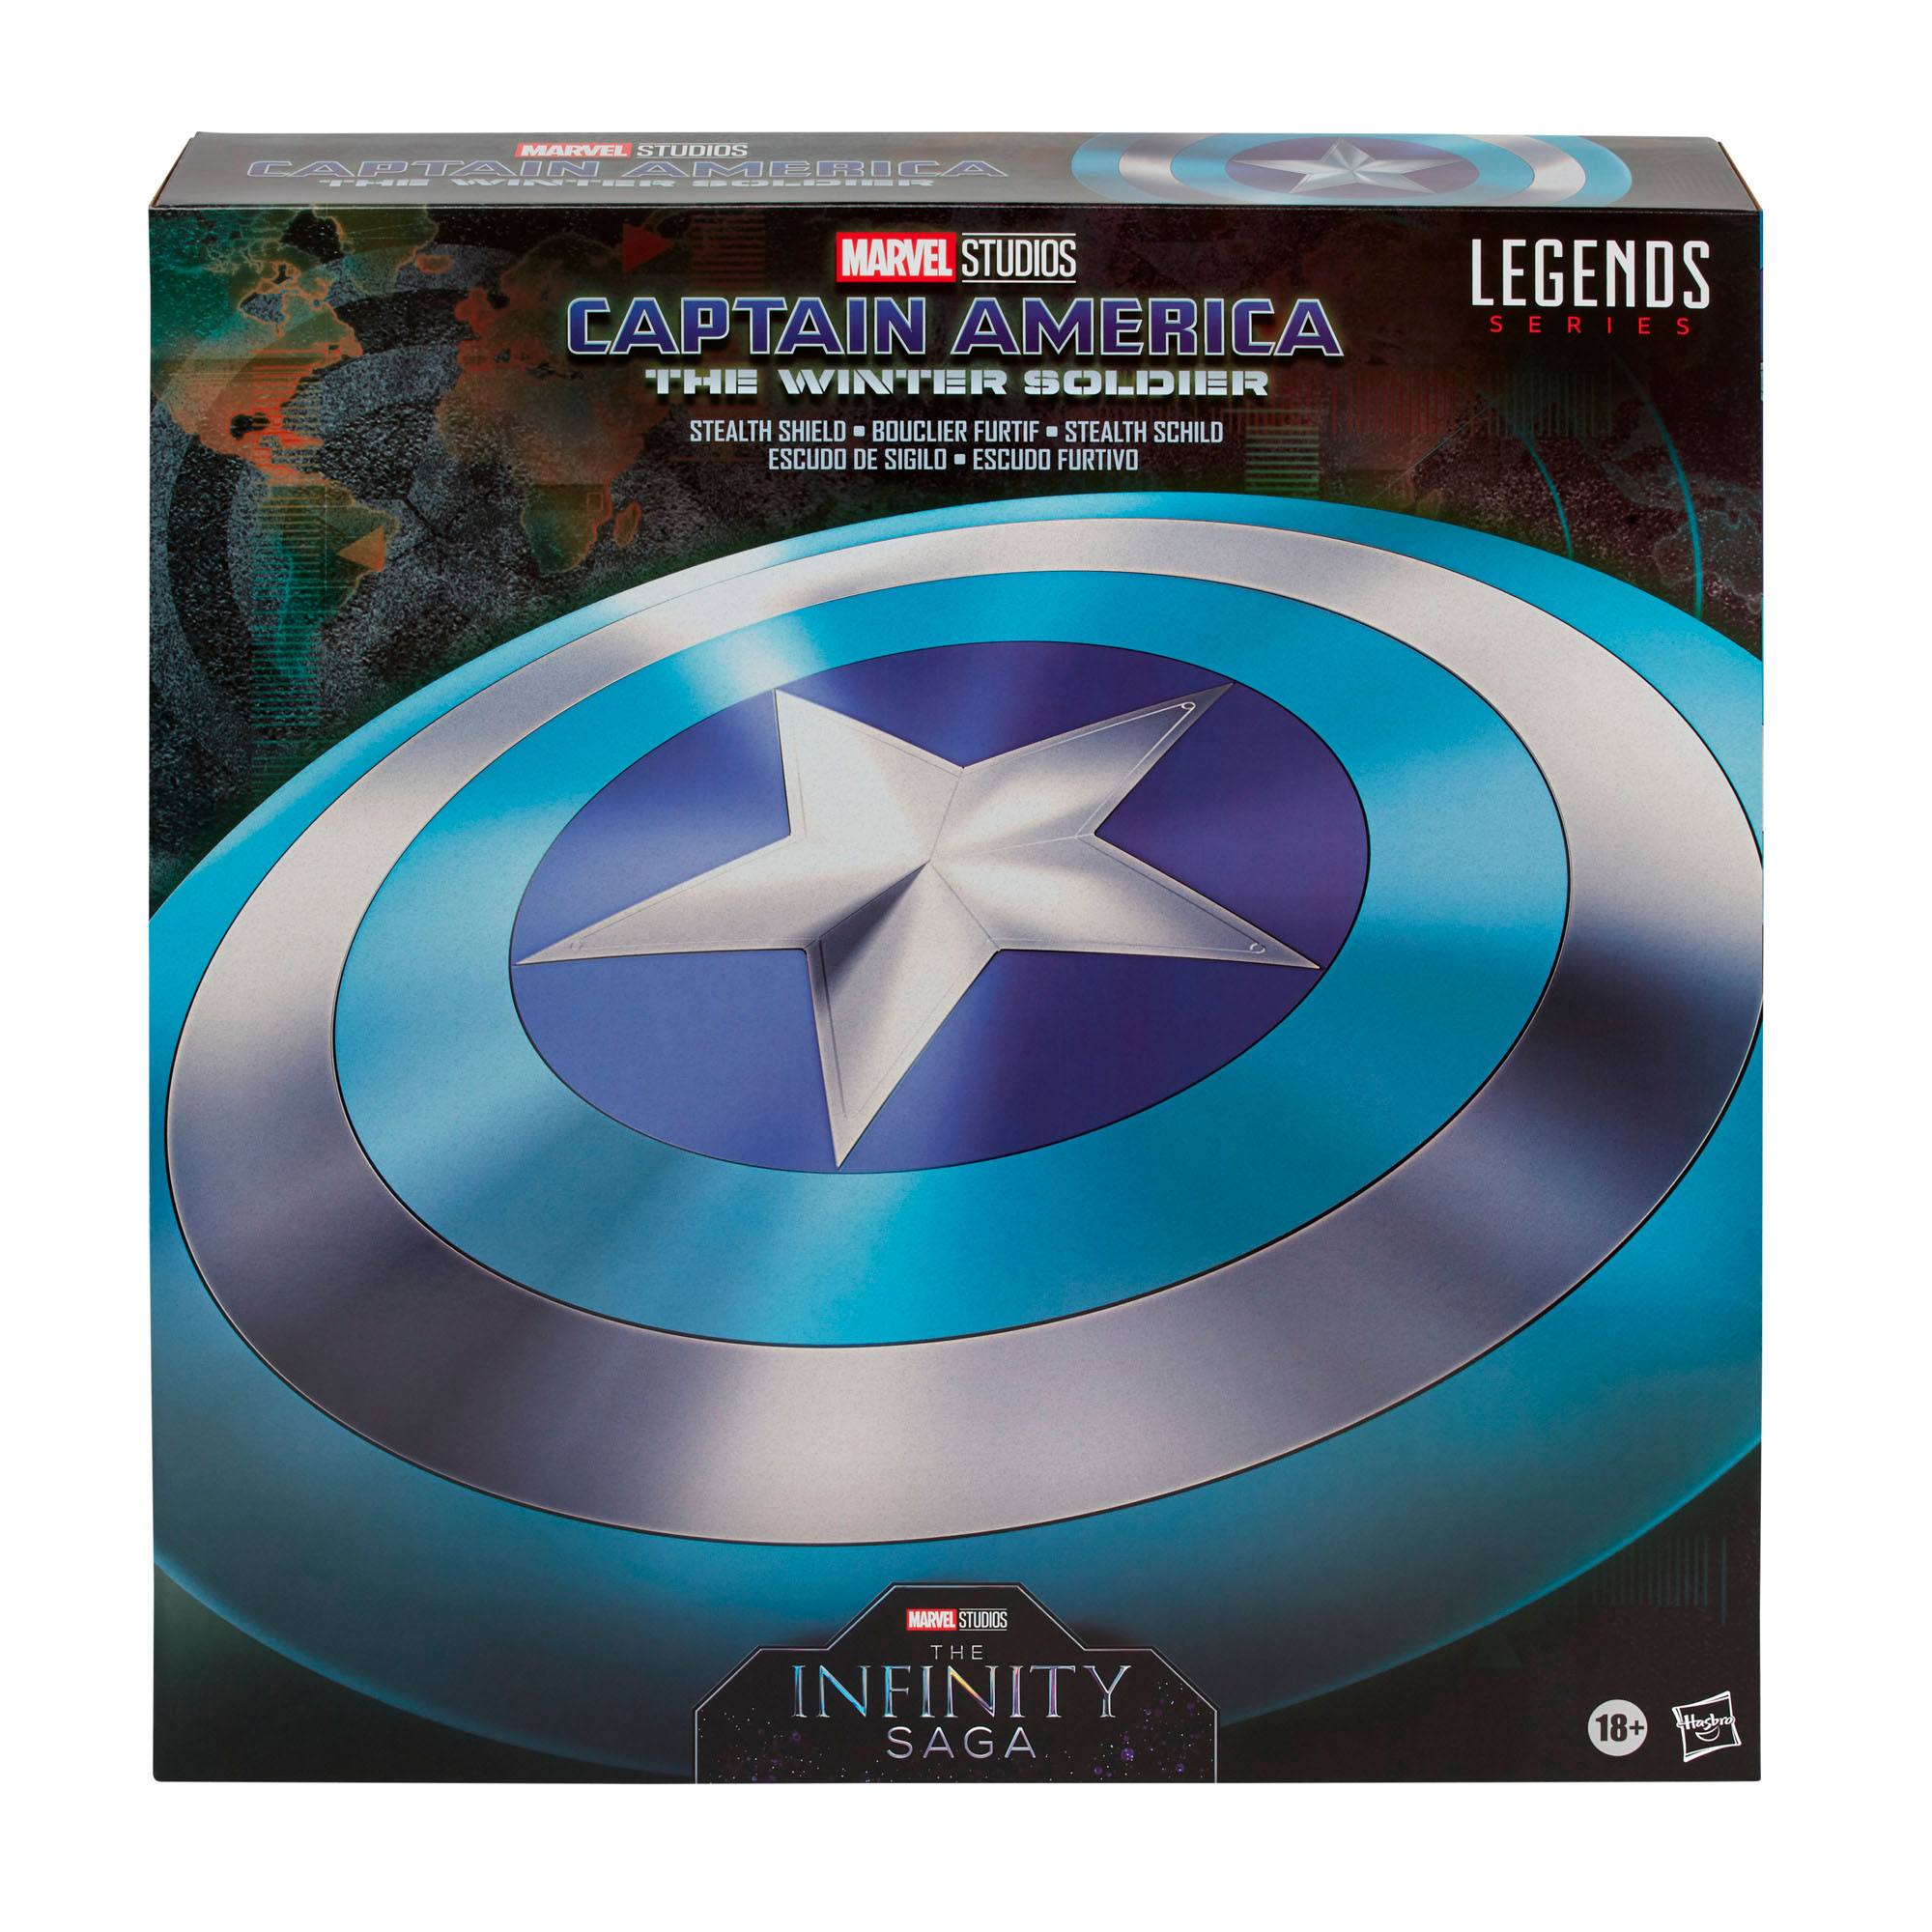 The Infinity Saga - The Return of the First Avenger Marvel Legends Series Stealth Schild 60 cm HASF1125 5010993842018